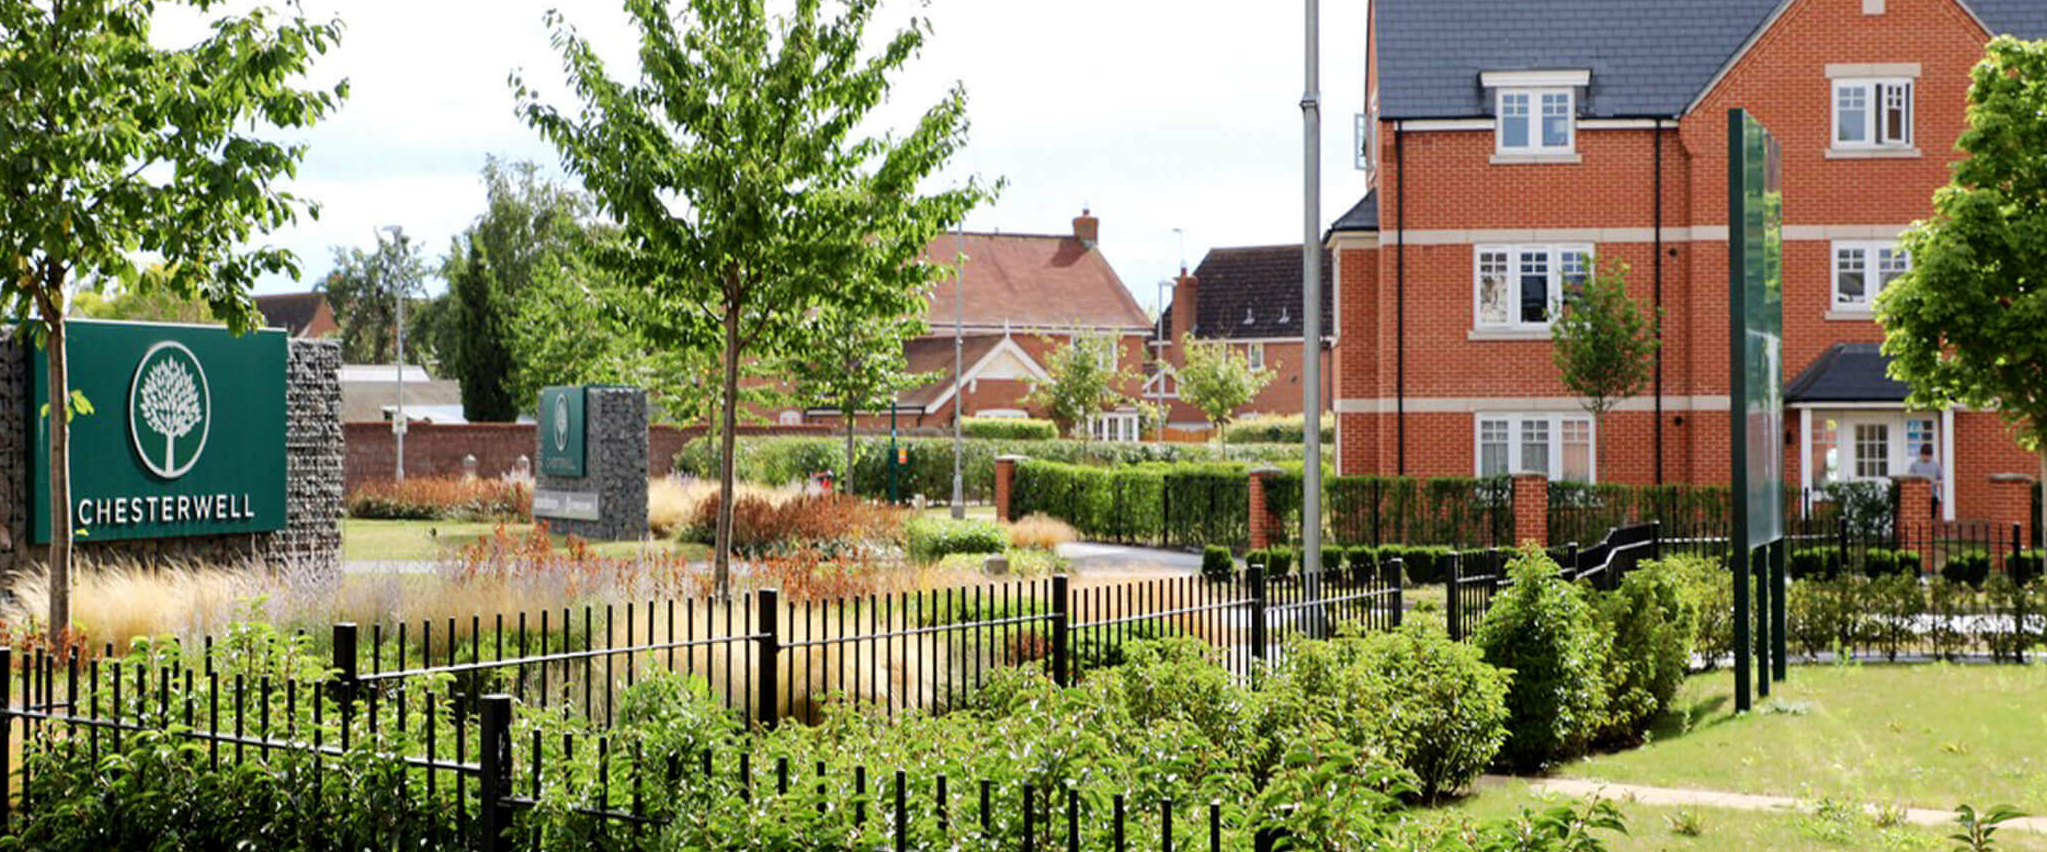 Open and green spaces: Why Chesterwell is top Colchester housing development